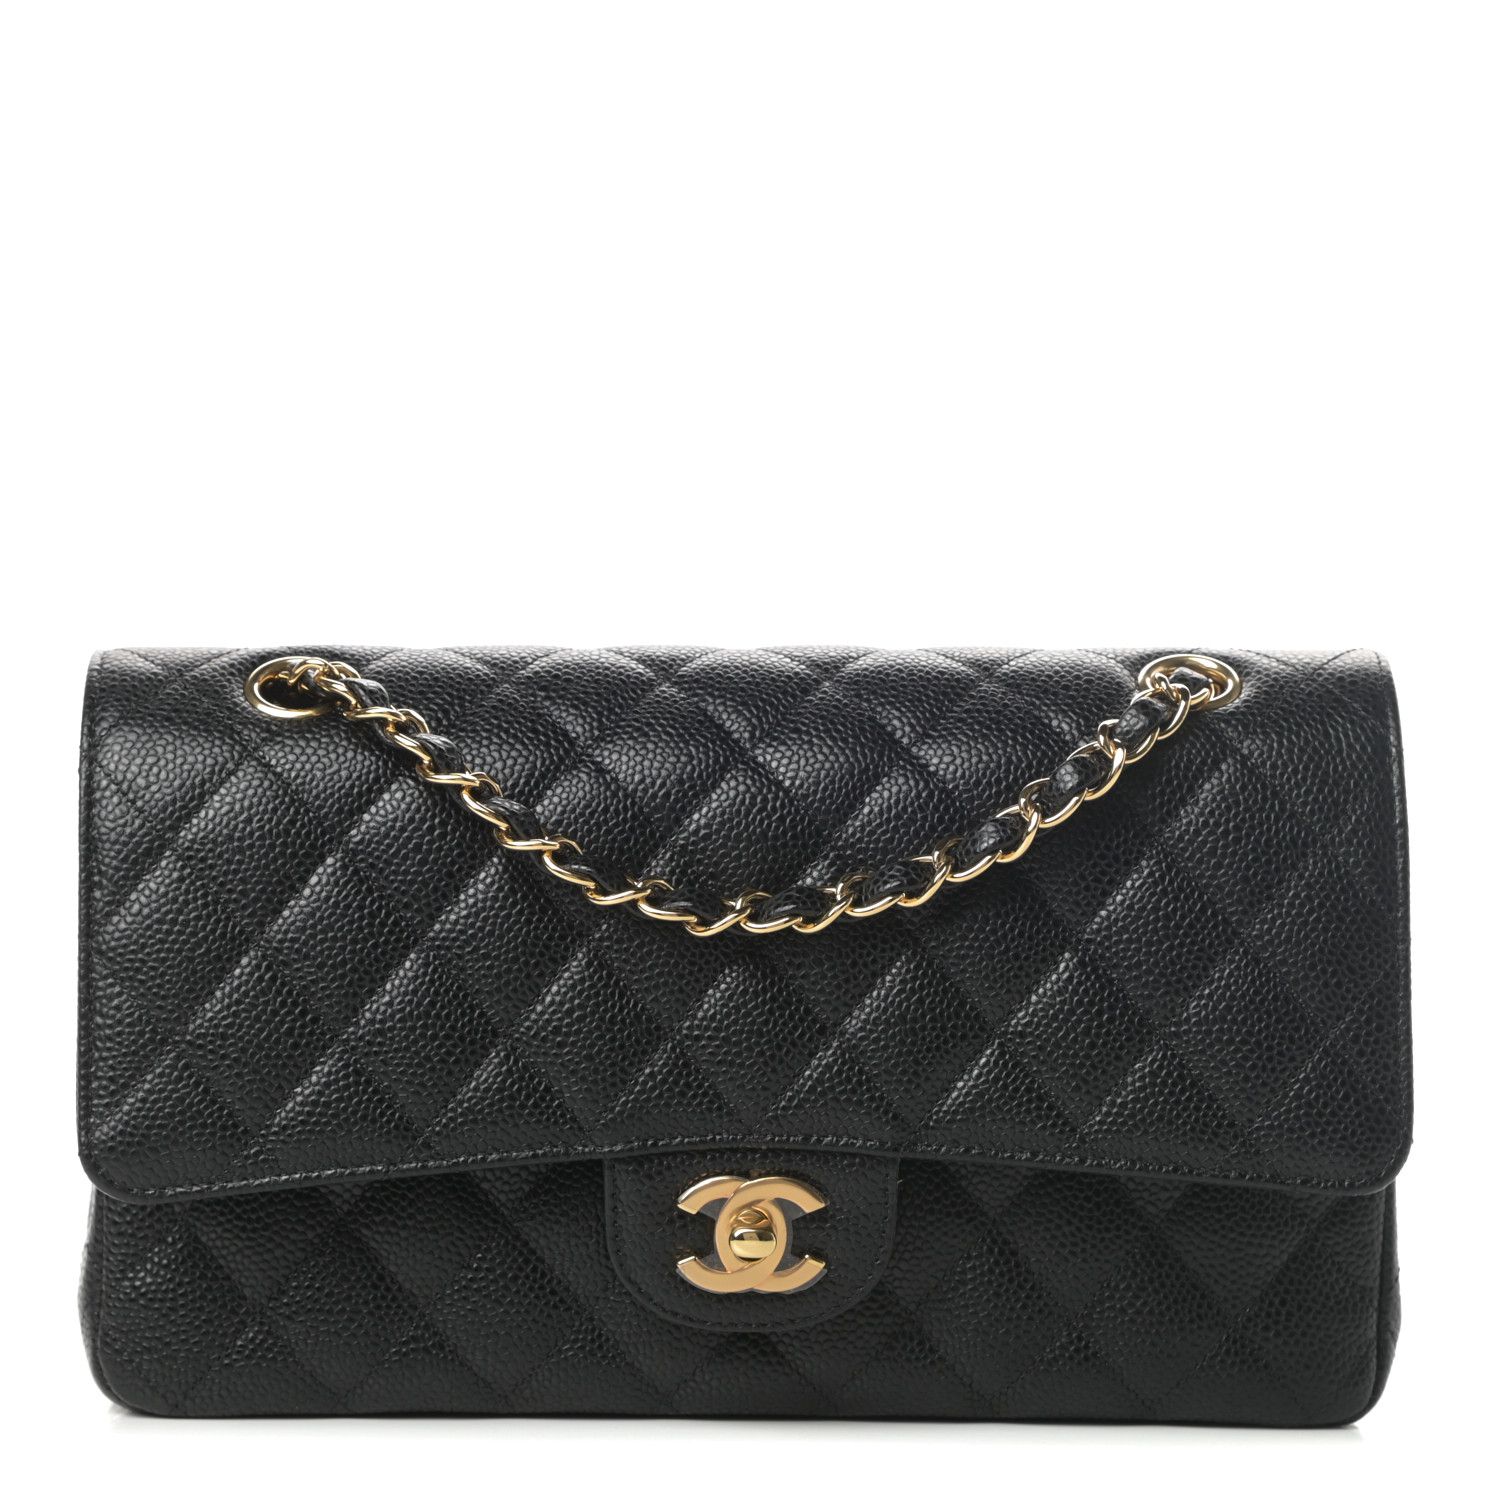 Caviar Quilted Medium Double Flap Black | Fashionphile